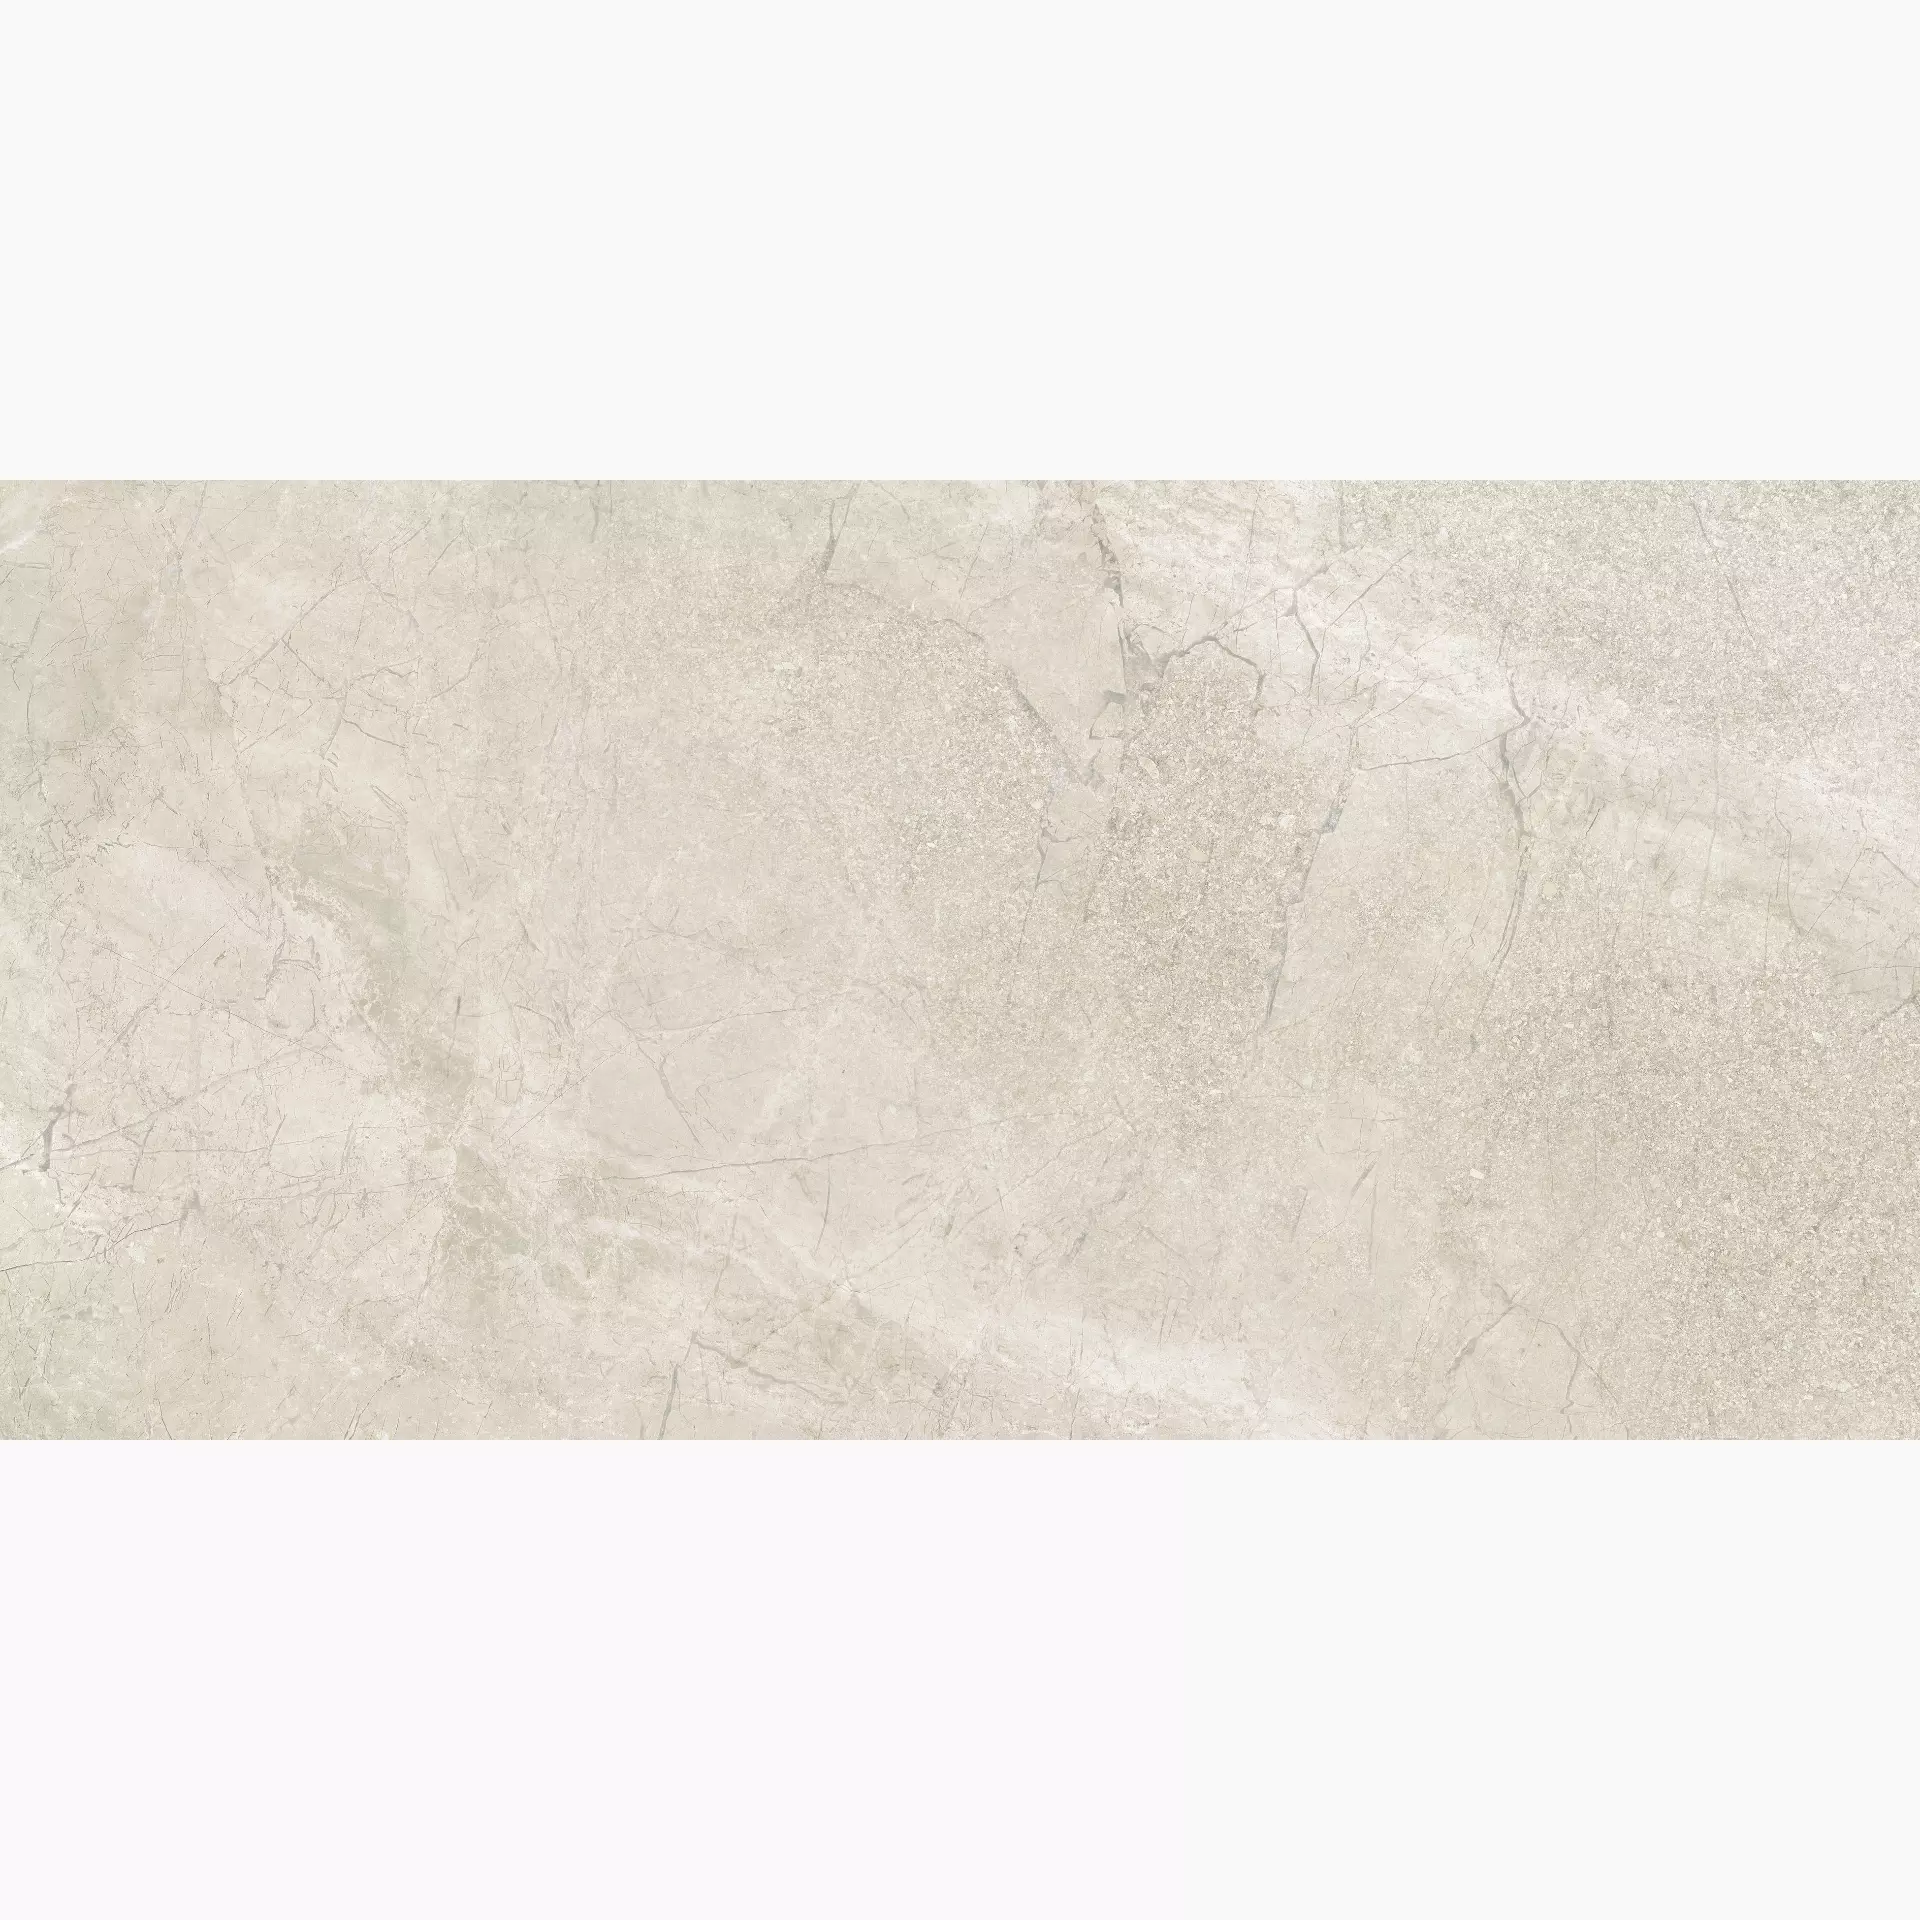 Refin River Beige Soft OH25 60x120cm rectified 9mm